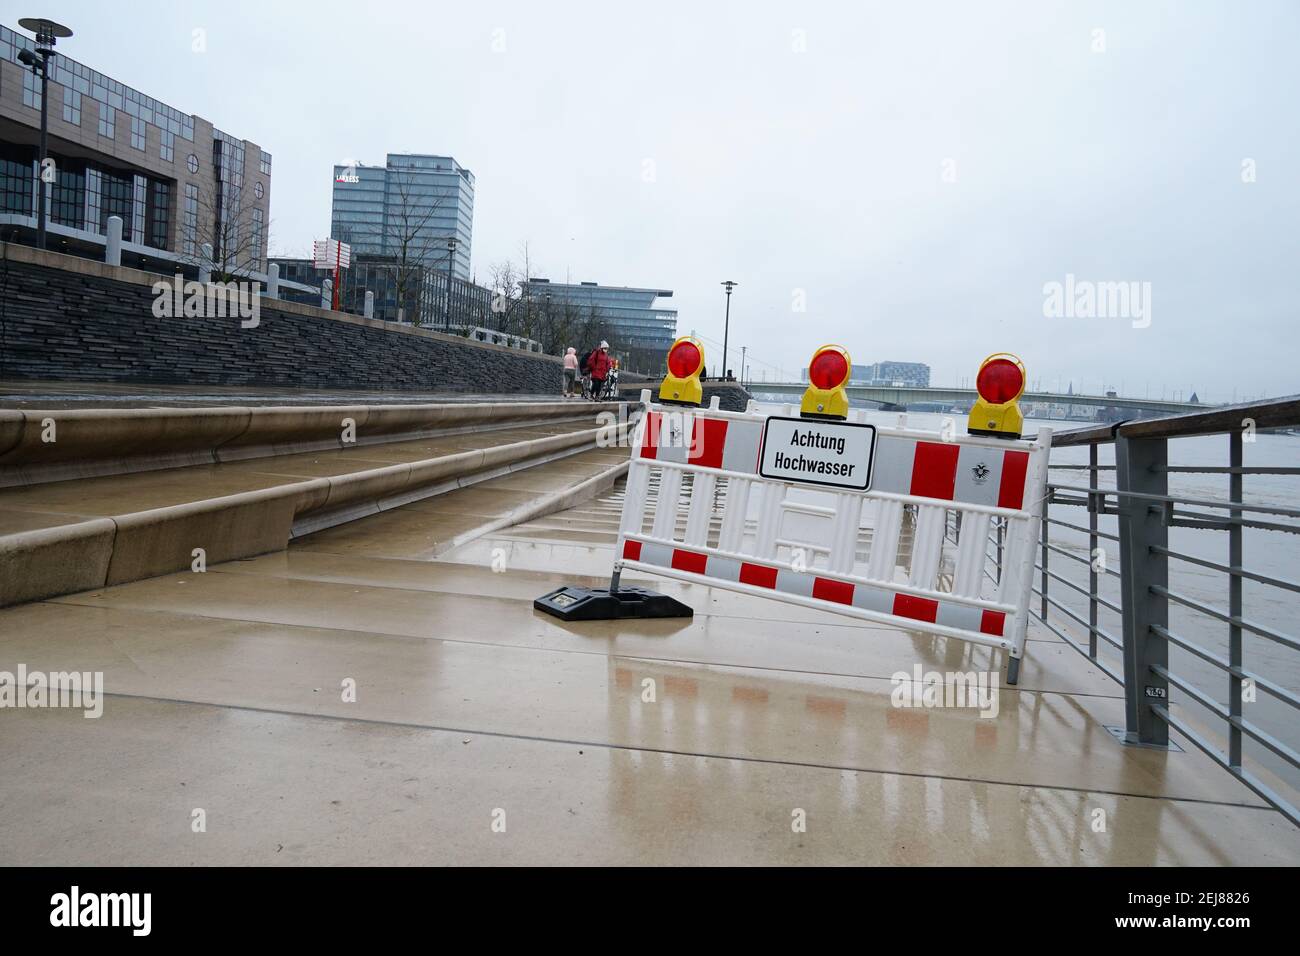 "Achtung Hochwasser - attention high tidewater" sign near the River Rhine in Cologne, Germany Stock Photo